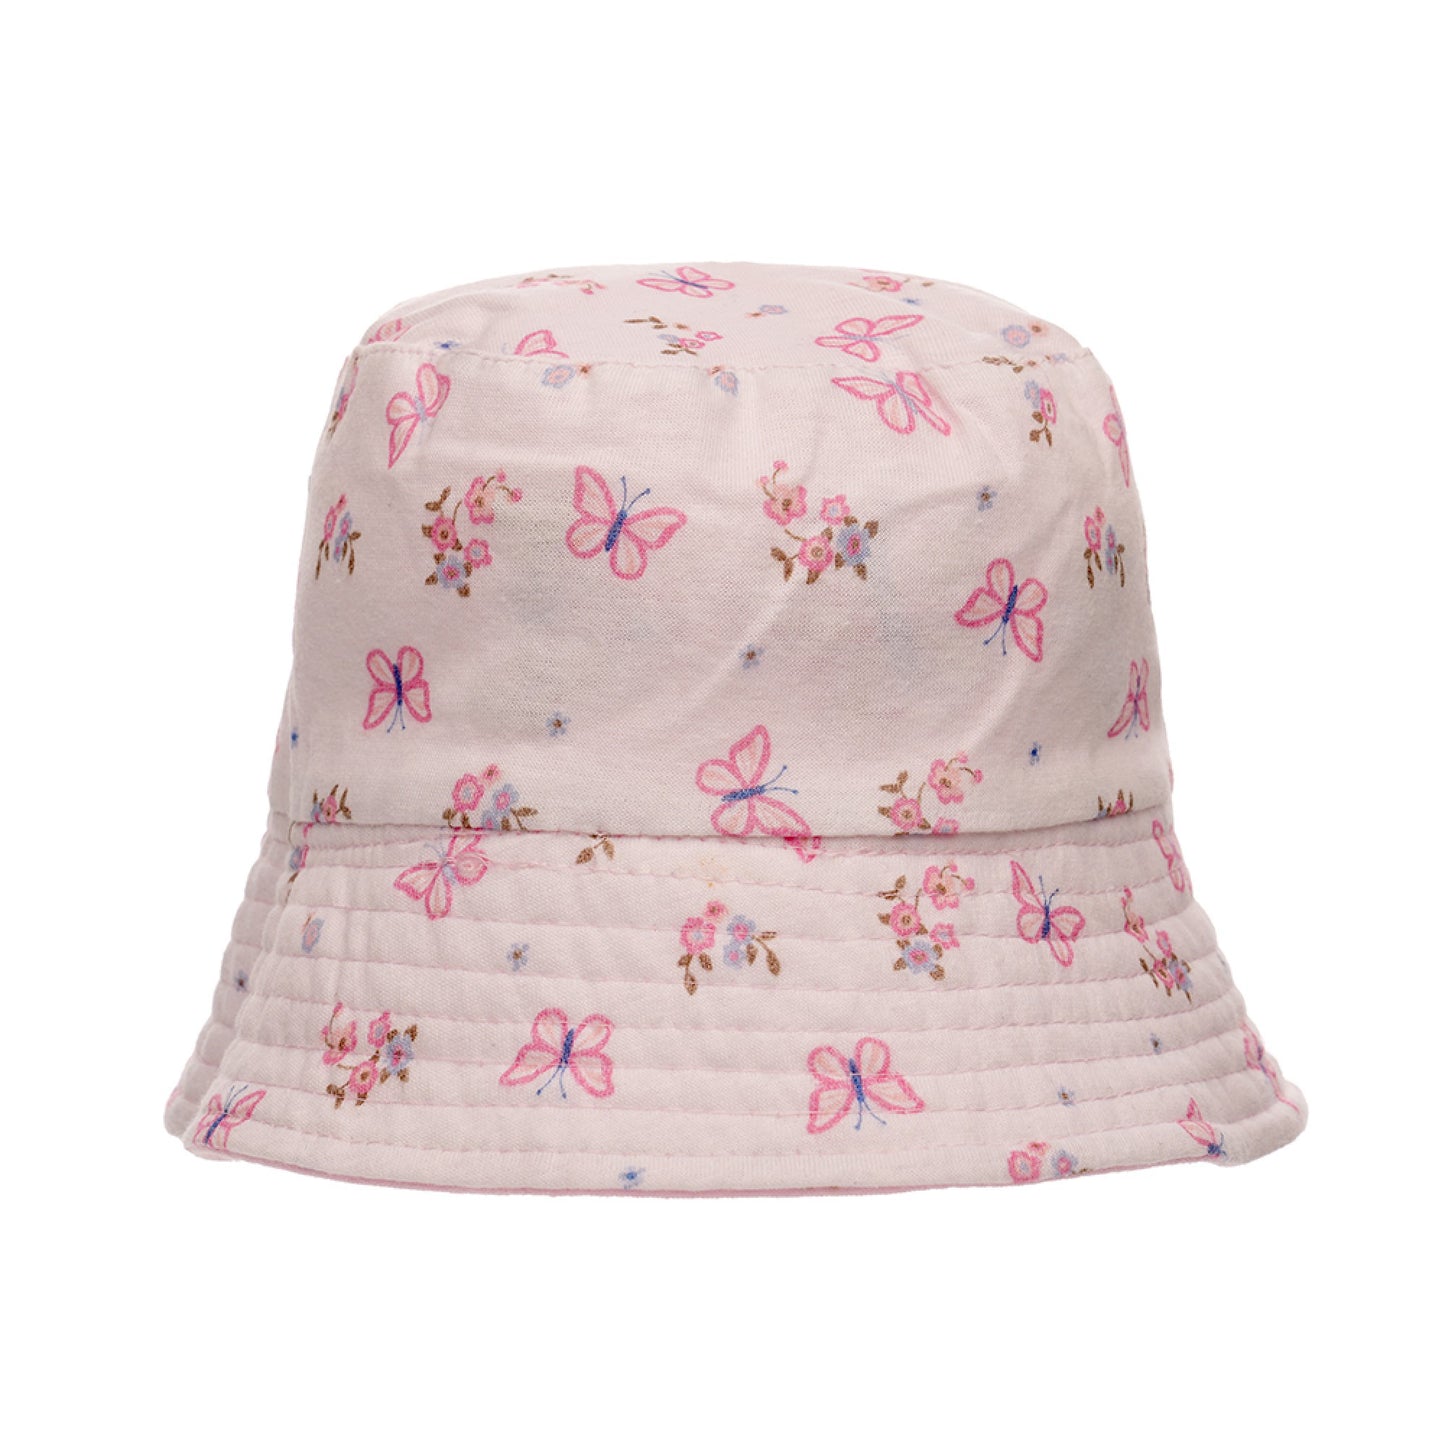 Baby Girls Butterfly Pattern Embroidered Reversible Pink Bucket Hat Sun Hat